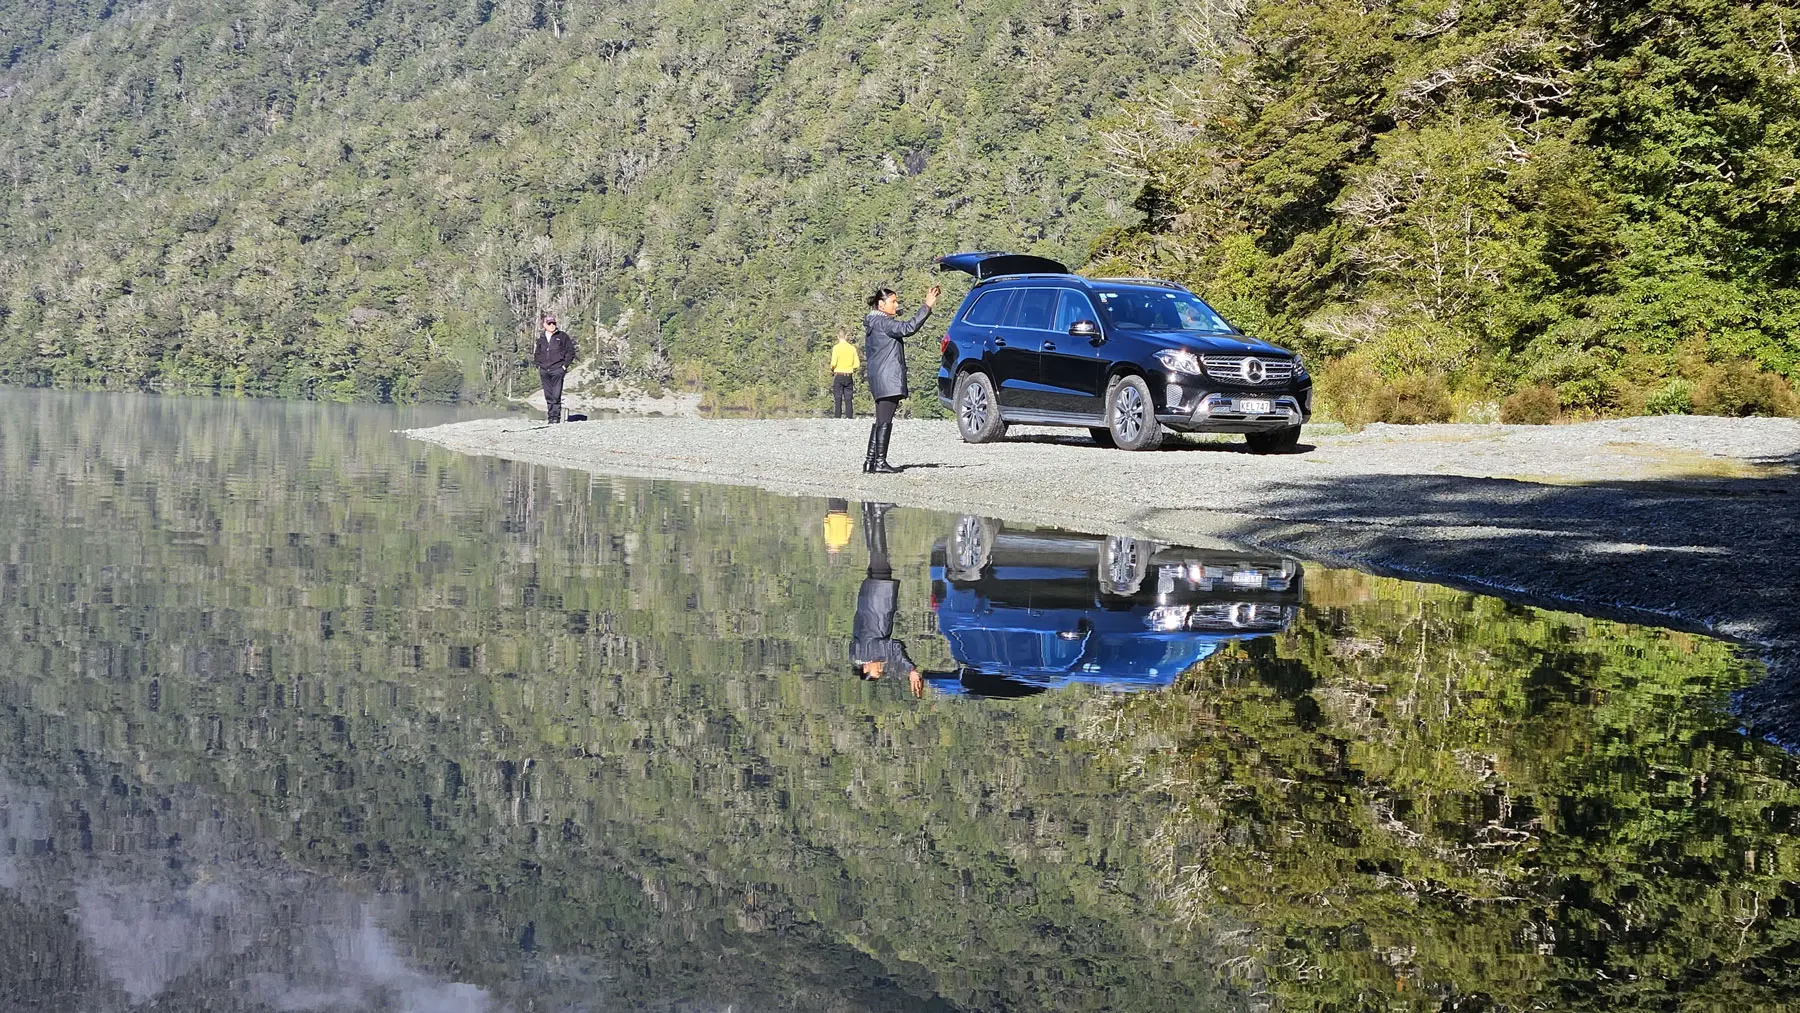 Visitors on a Lake Gunn beach showing impressive reflections with their luxury vehicle during a Milford Sound Private Tour.